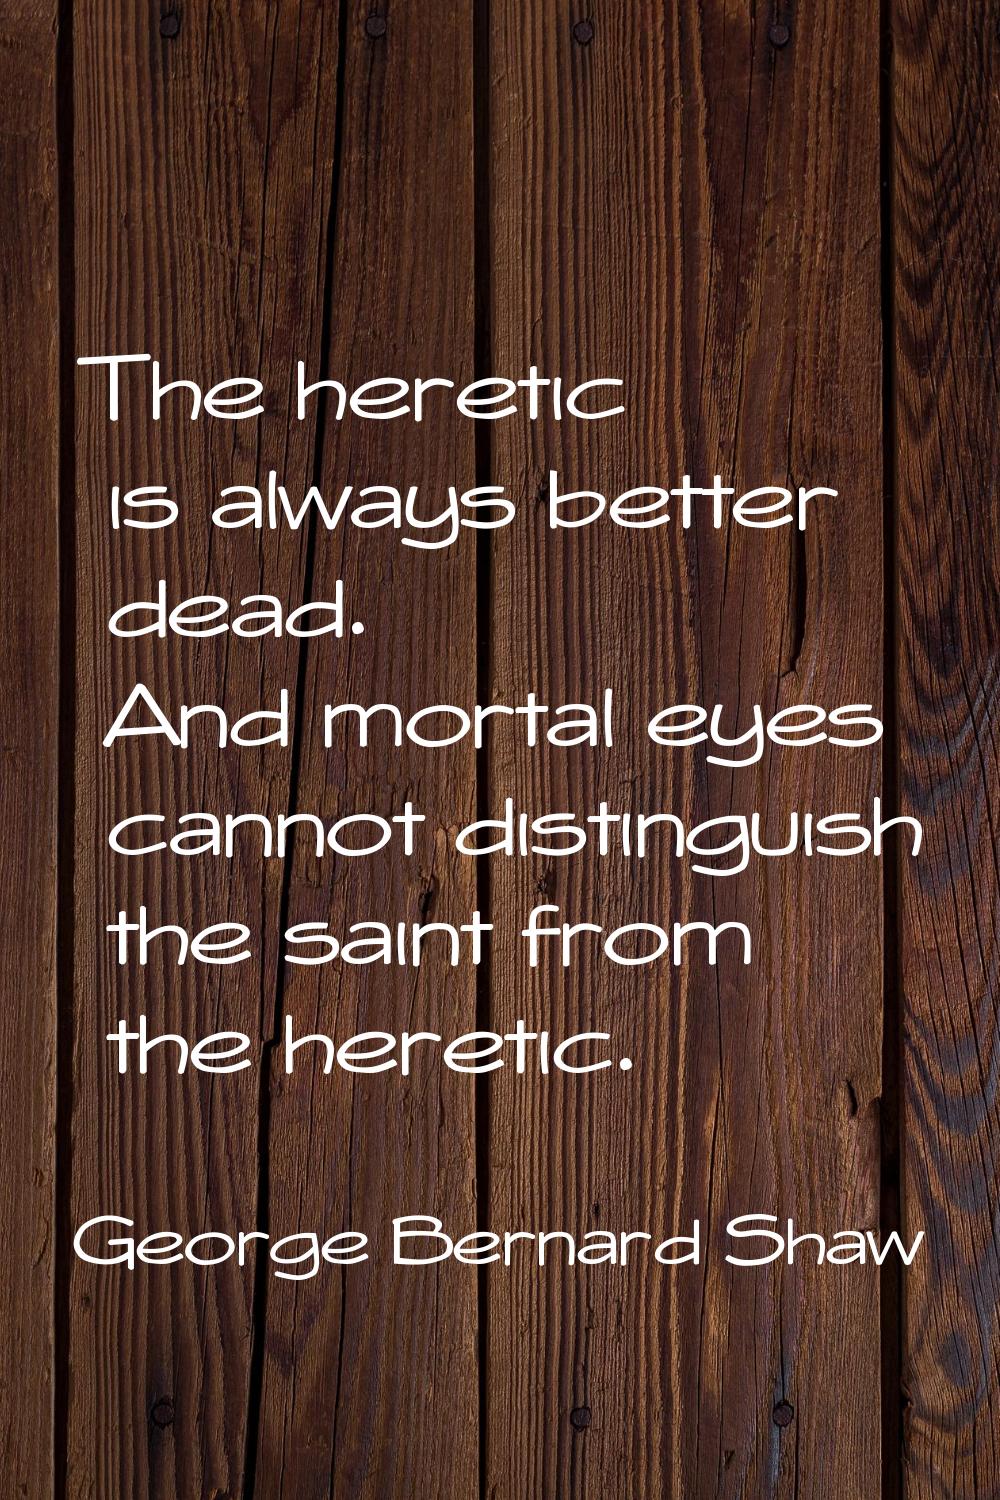 The heretic is always better dead. And mortal eyes cannot distinguish the saint from the heretic.